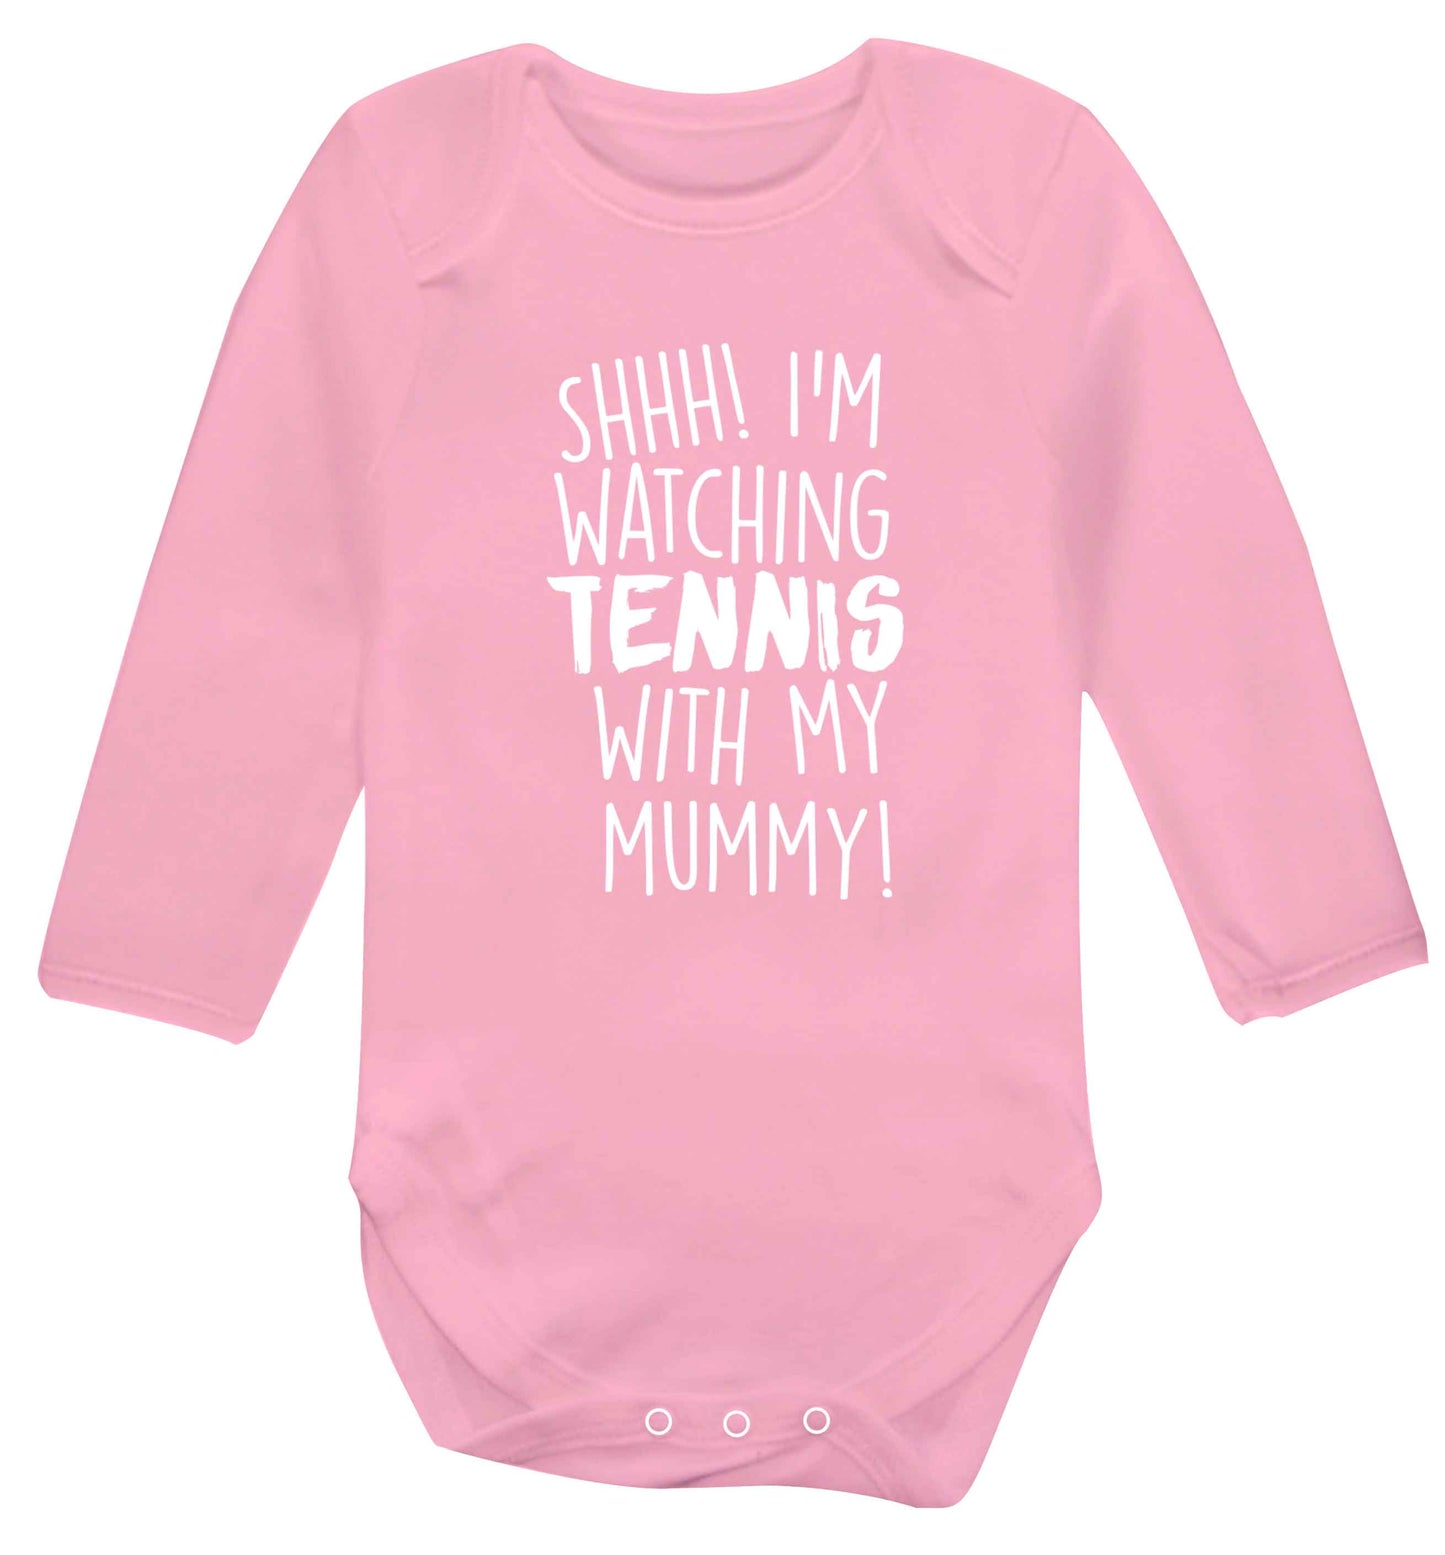 Shh! I'm watching tennis with my mummy! Baby Vest long sleeved pale pink 6-12 months